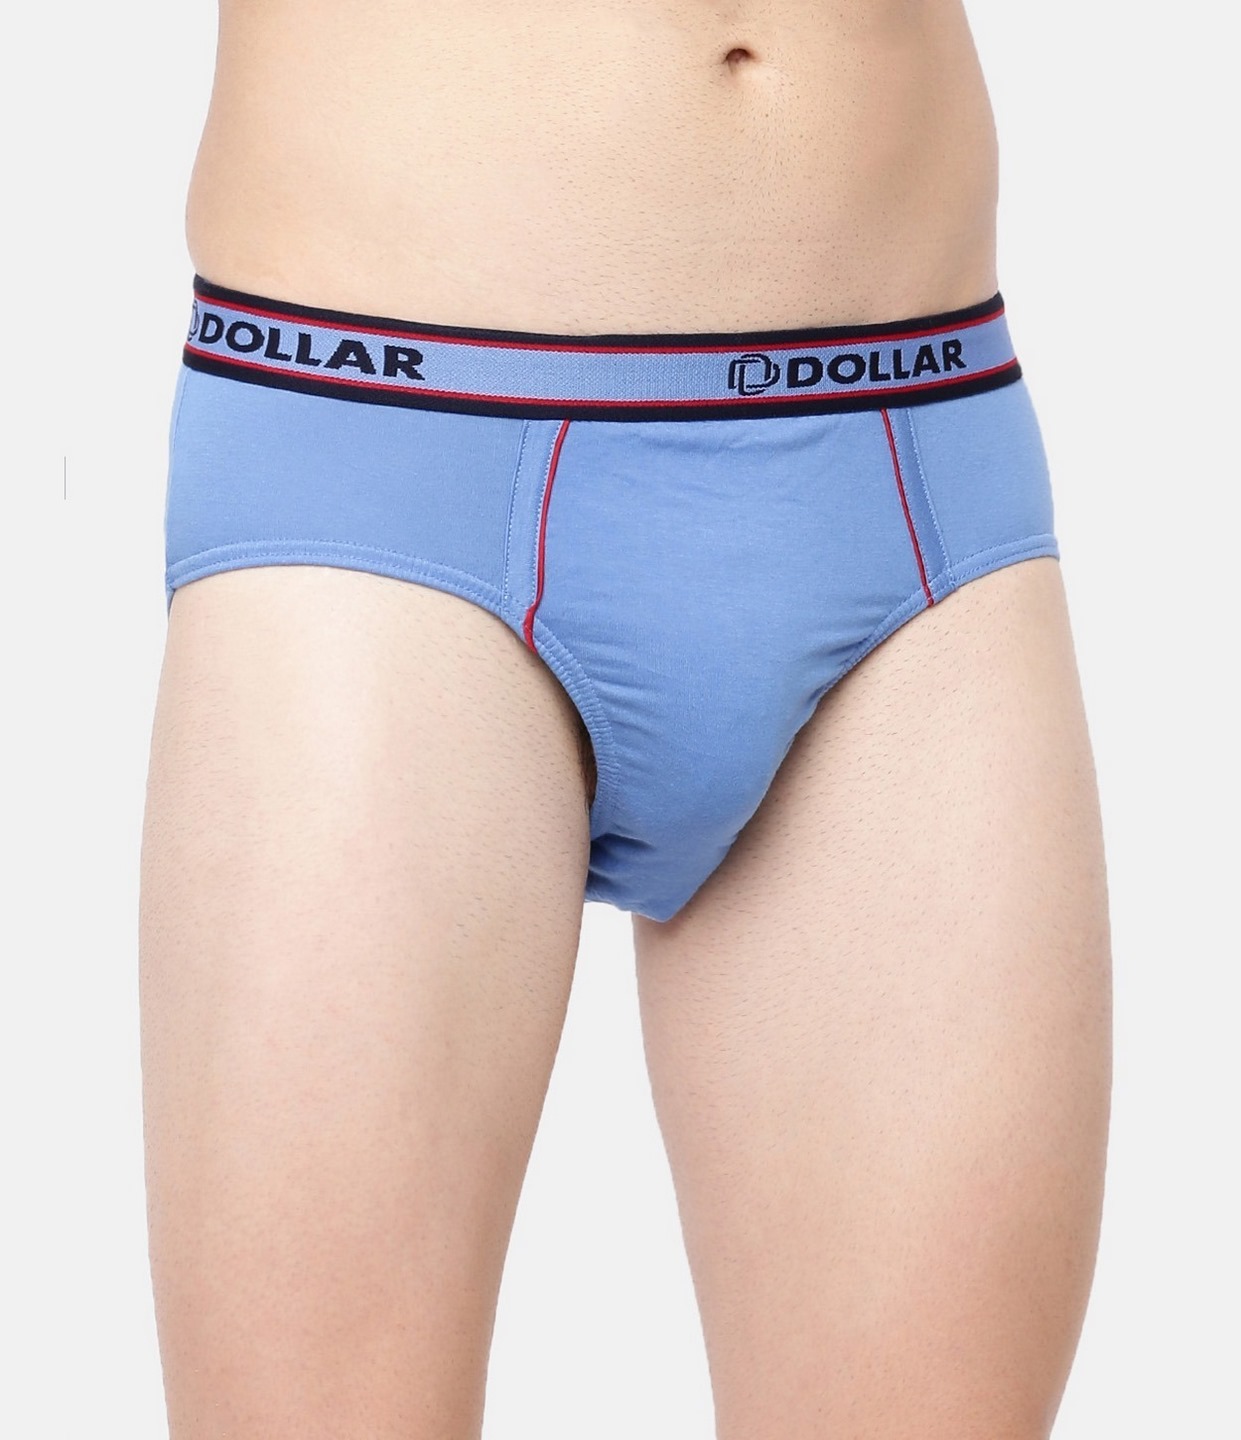 Buy Dollar Bigboss Men's Assorted Pack of 5 Brief  (8905474835290_MBBR-04-MIDASTE-PO5-CO1-S) at